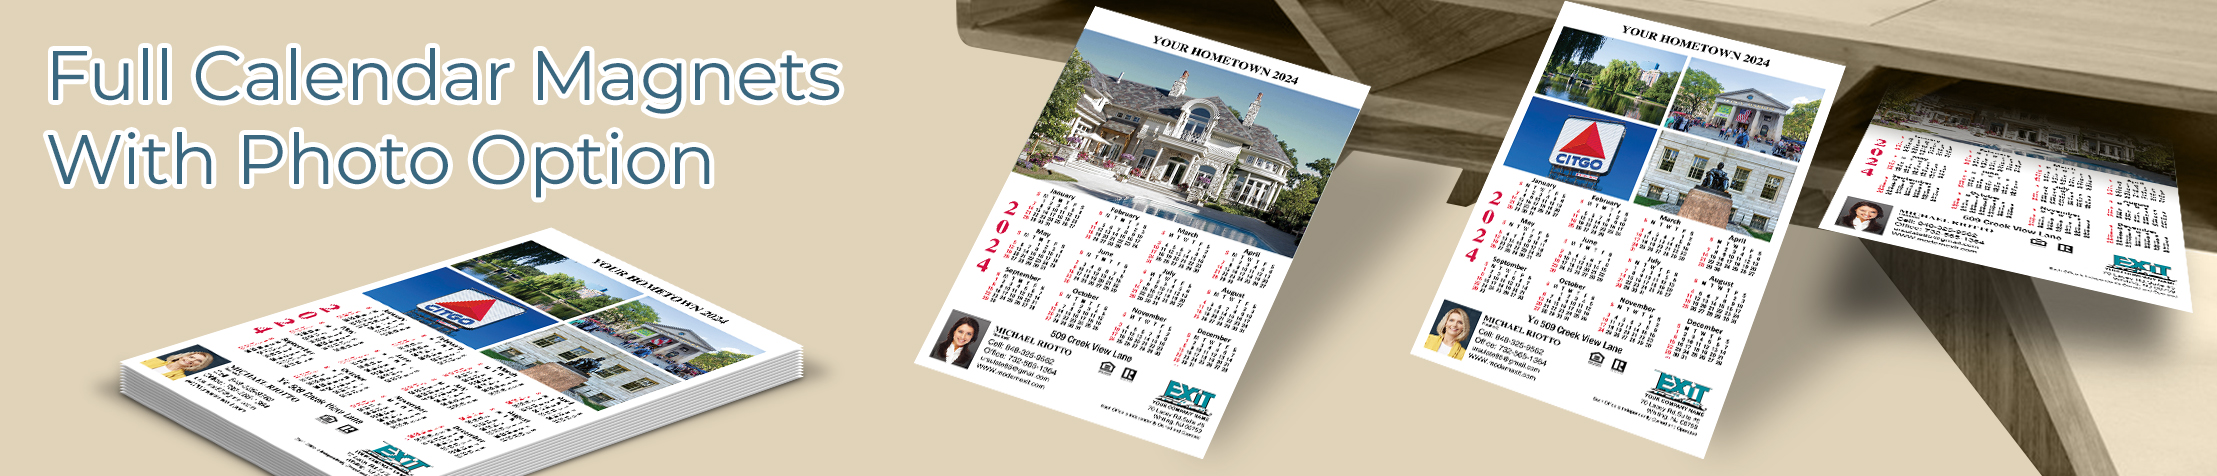 Exit Realty Real Estate Full Calendar Magnets With Photo Option - Exit Realty approved vendor 2019 calendars, full-color | BestPrintBuy.com